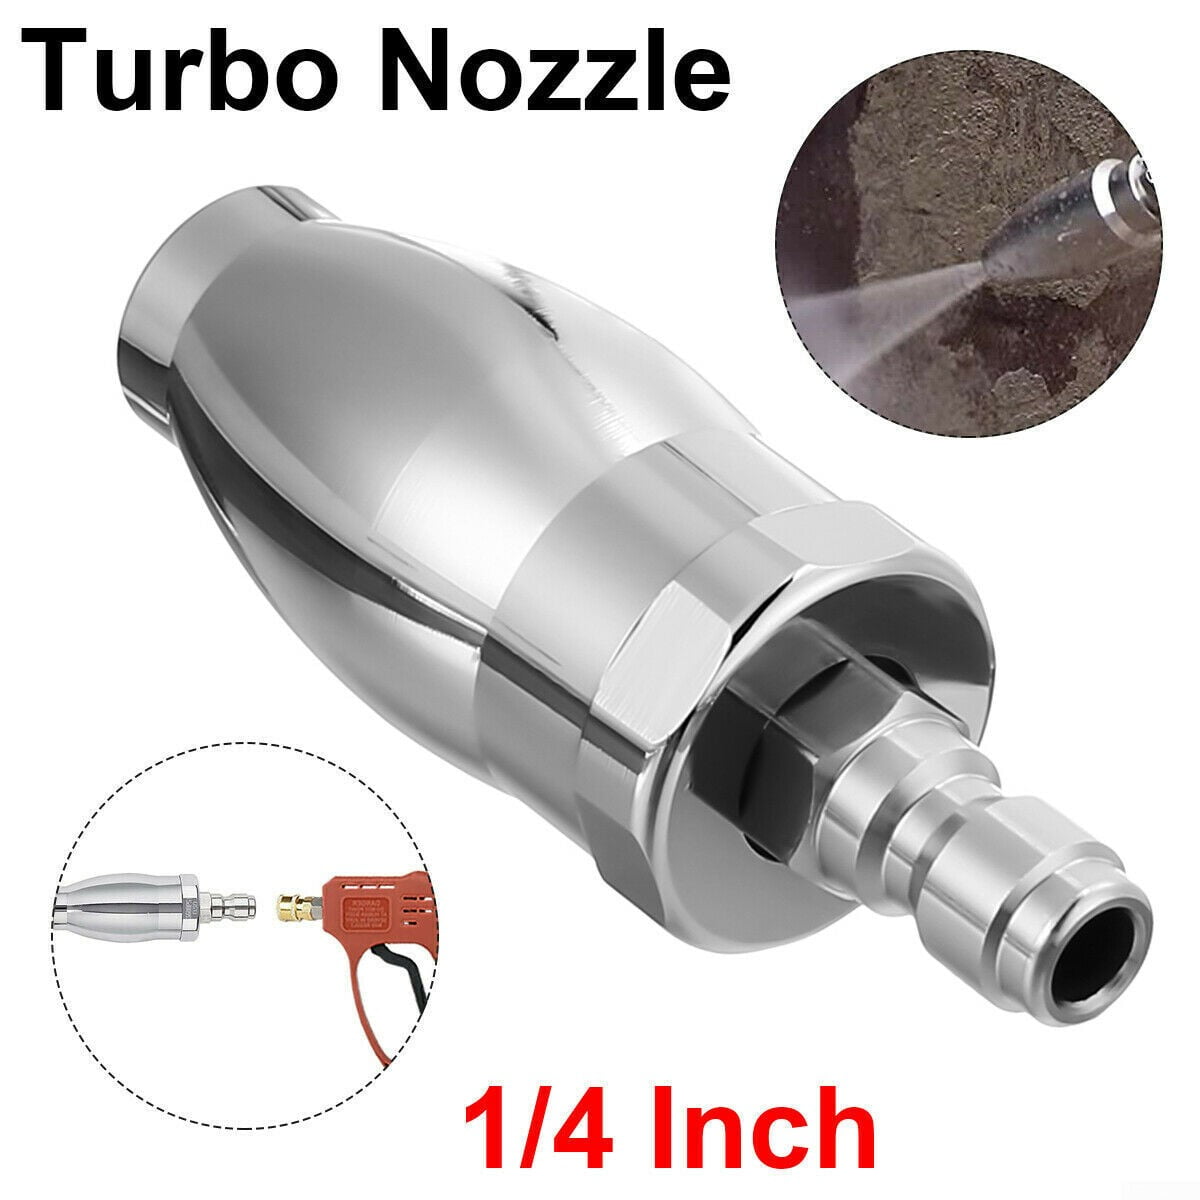 Turbo Spray Nozzle for Pressure Washers 3.0 GPM with 5 Tips 